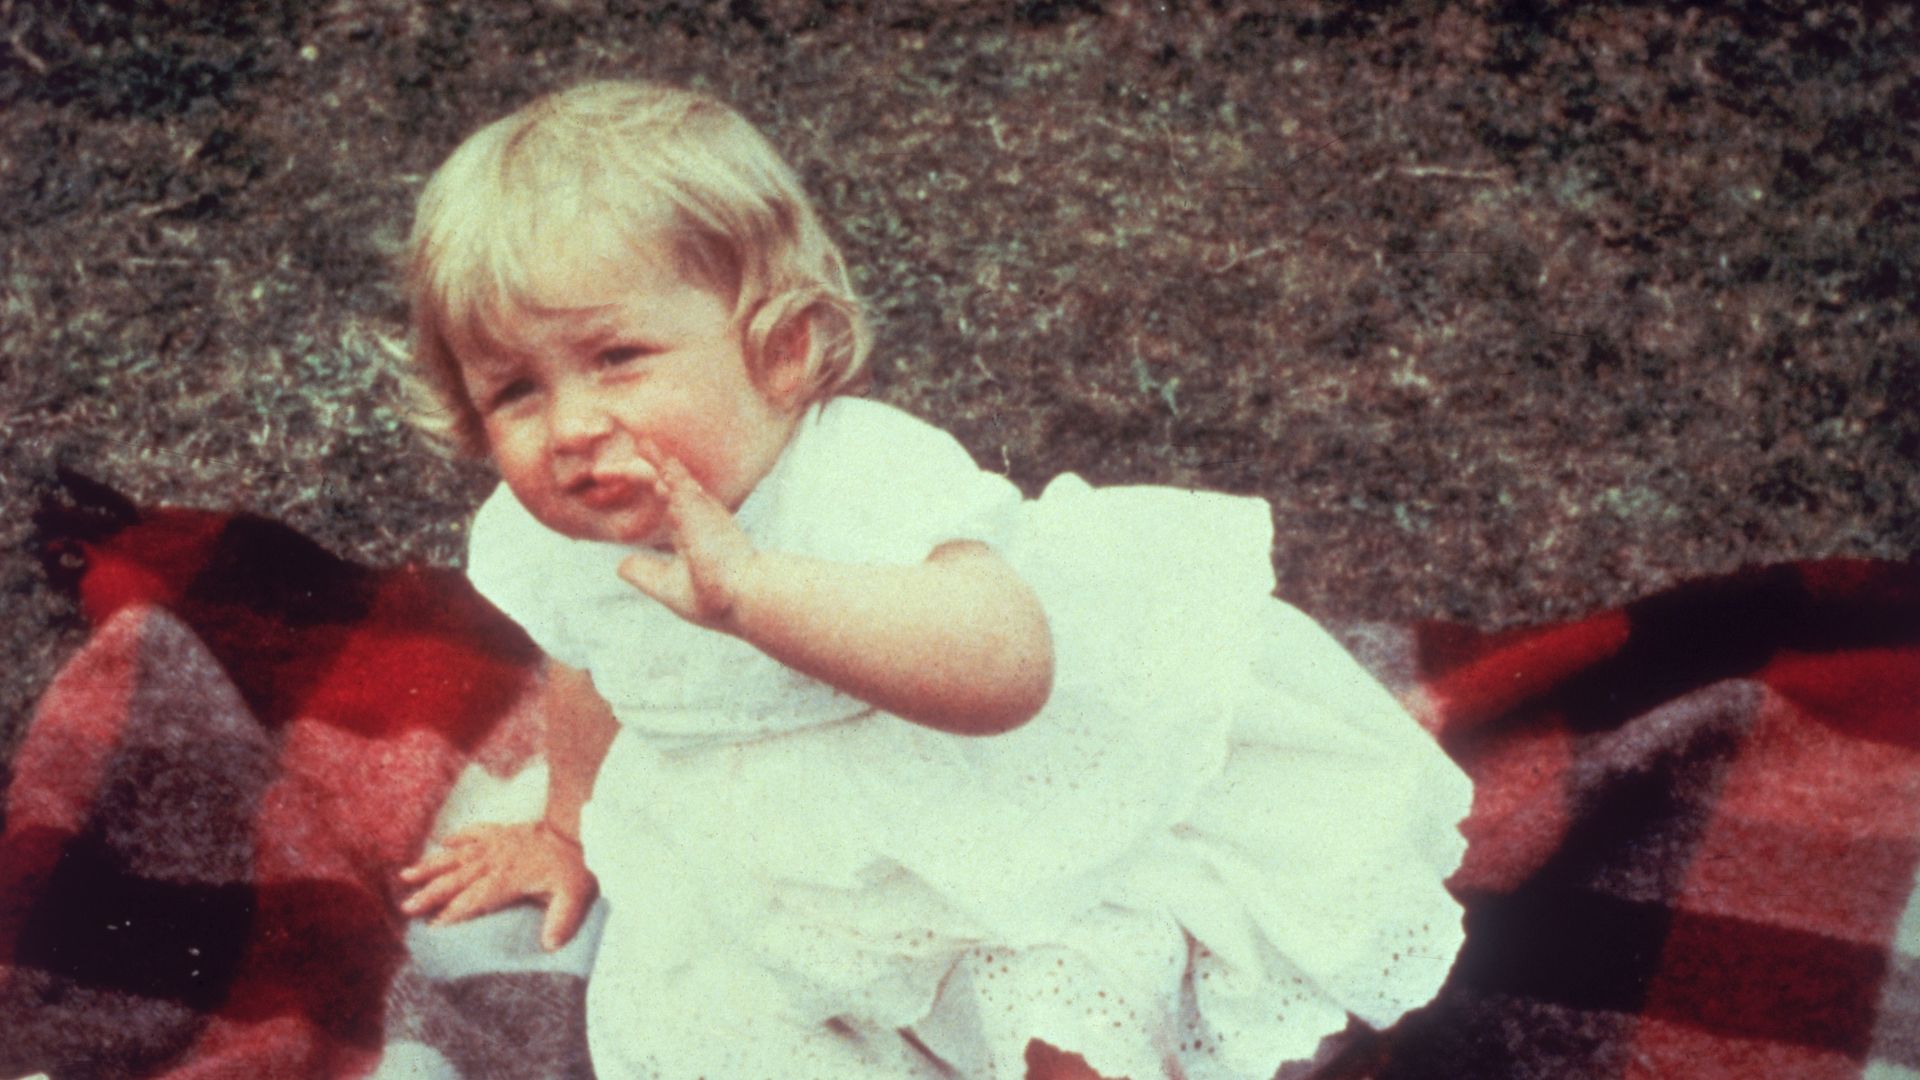 A baby Princess Diana in a white dress on a blanket